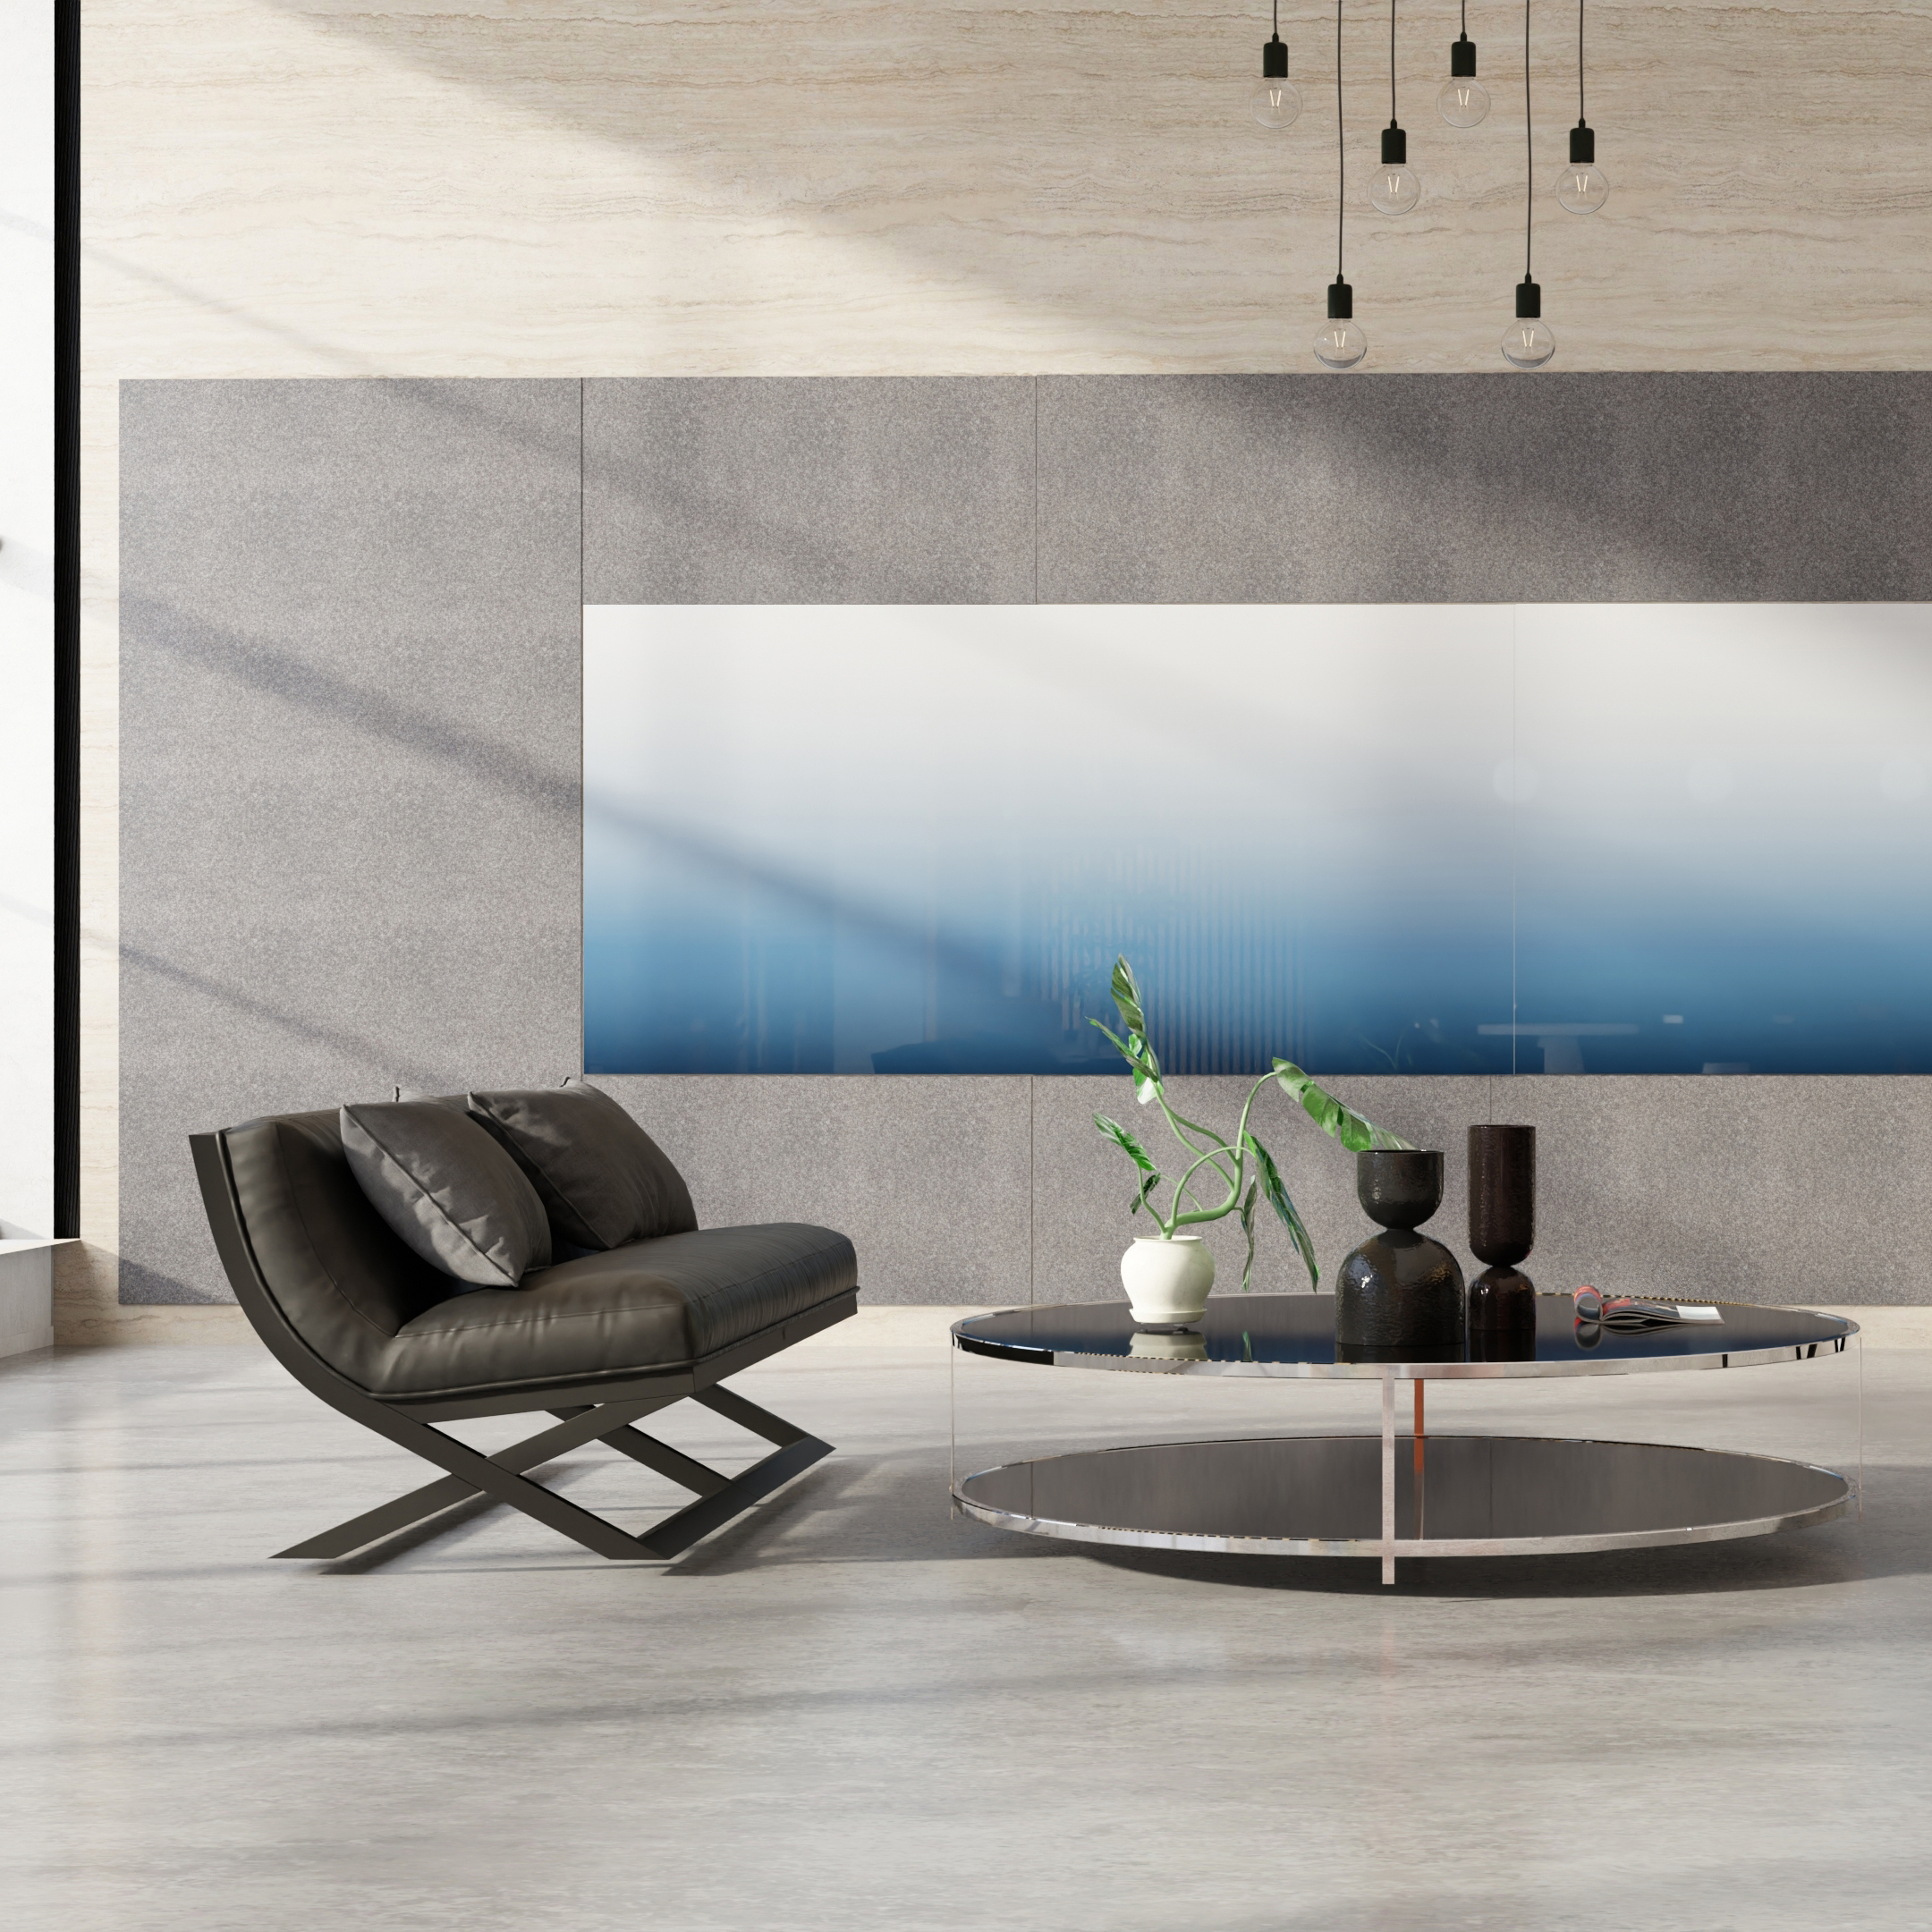 Cadence Multi-Surface Blended Wall System